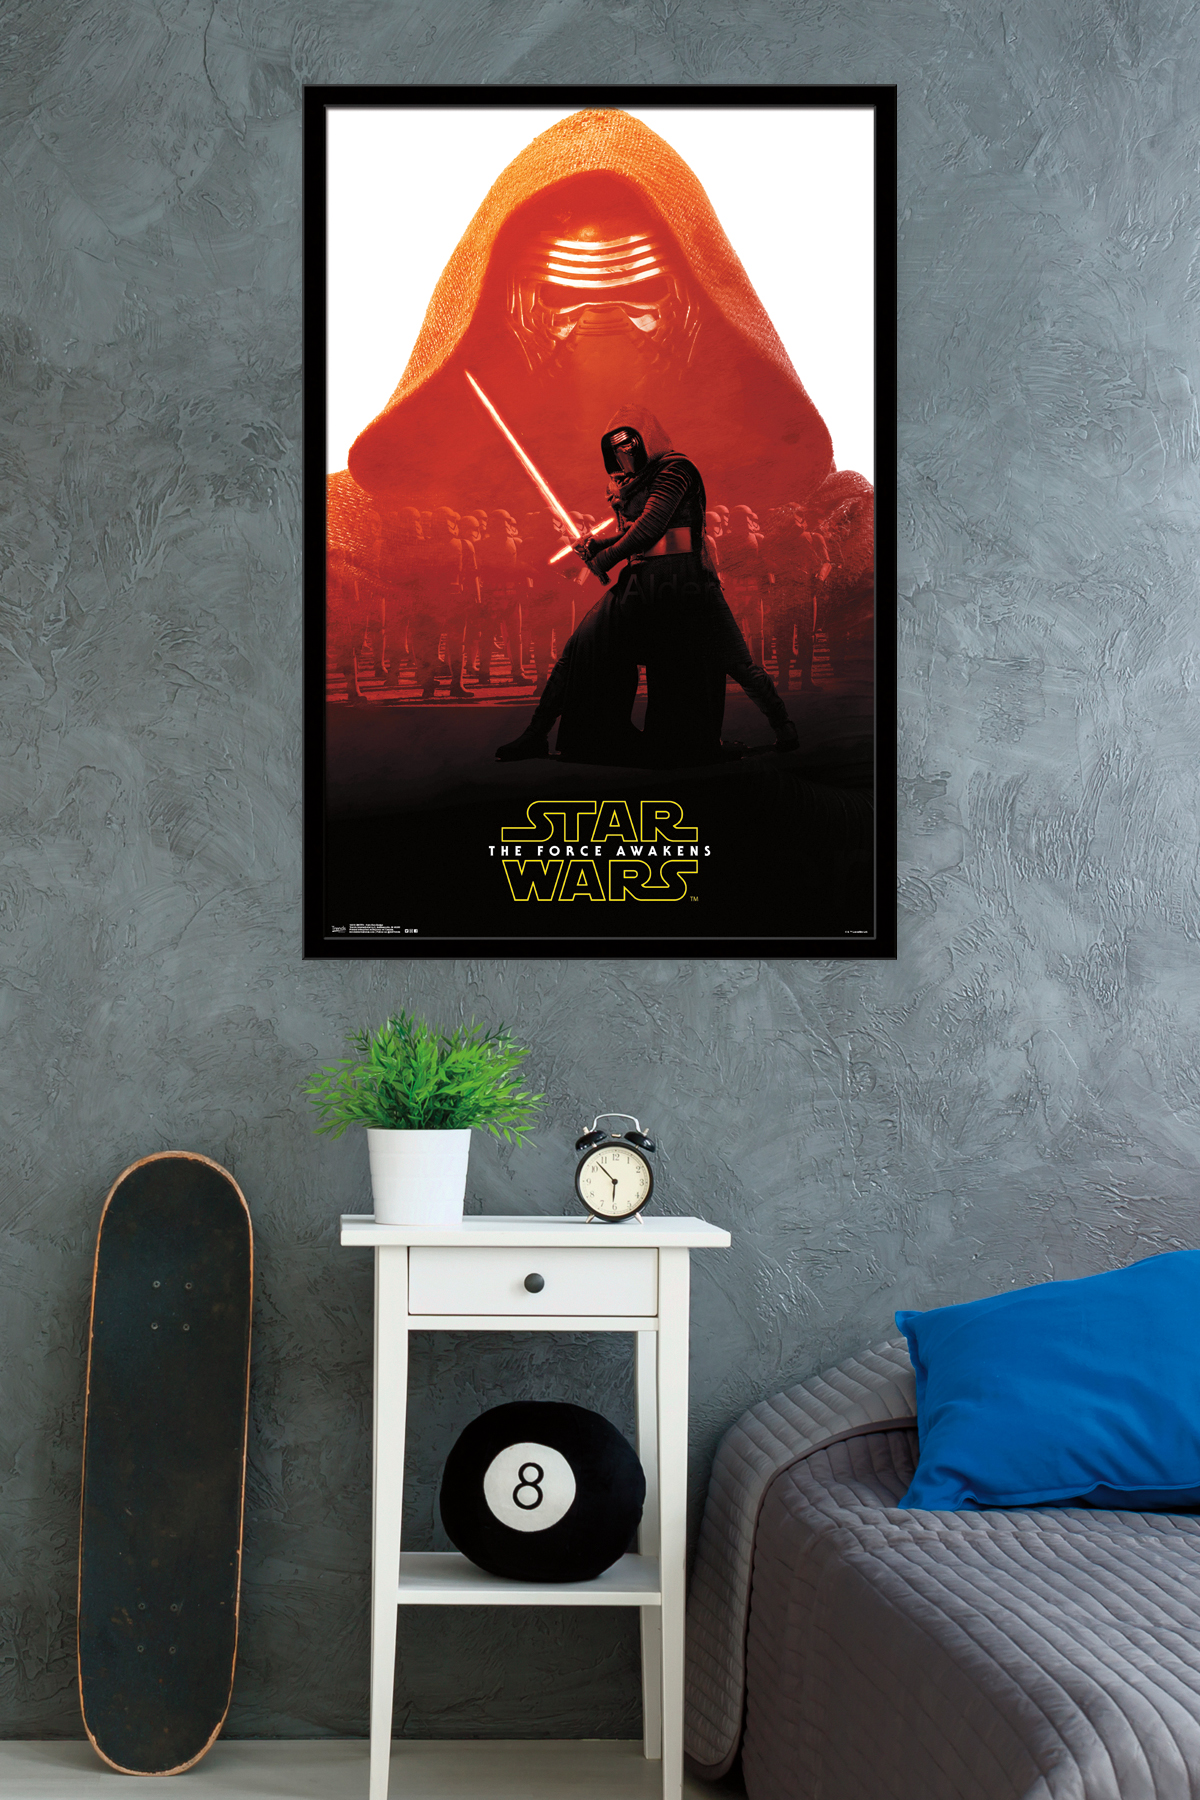 Star Wars: The Force Awakens - Kylo Ren Badge Wall Poster, 22.375" x 34", Framed - image 2 of 2